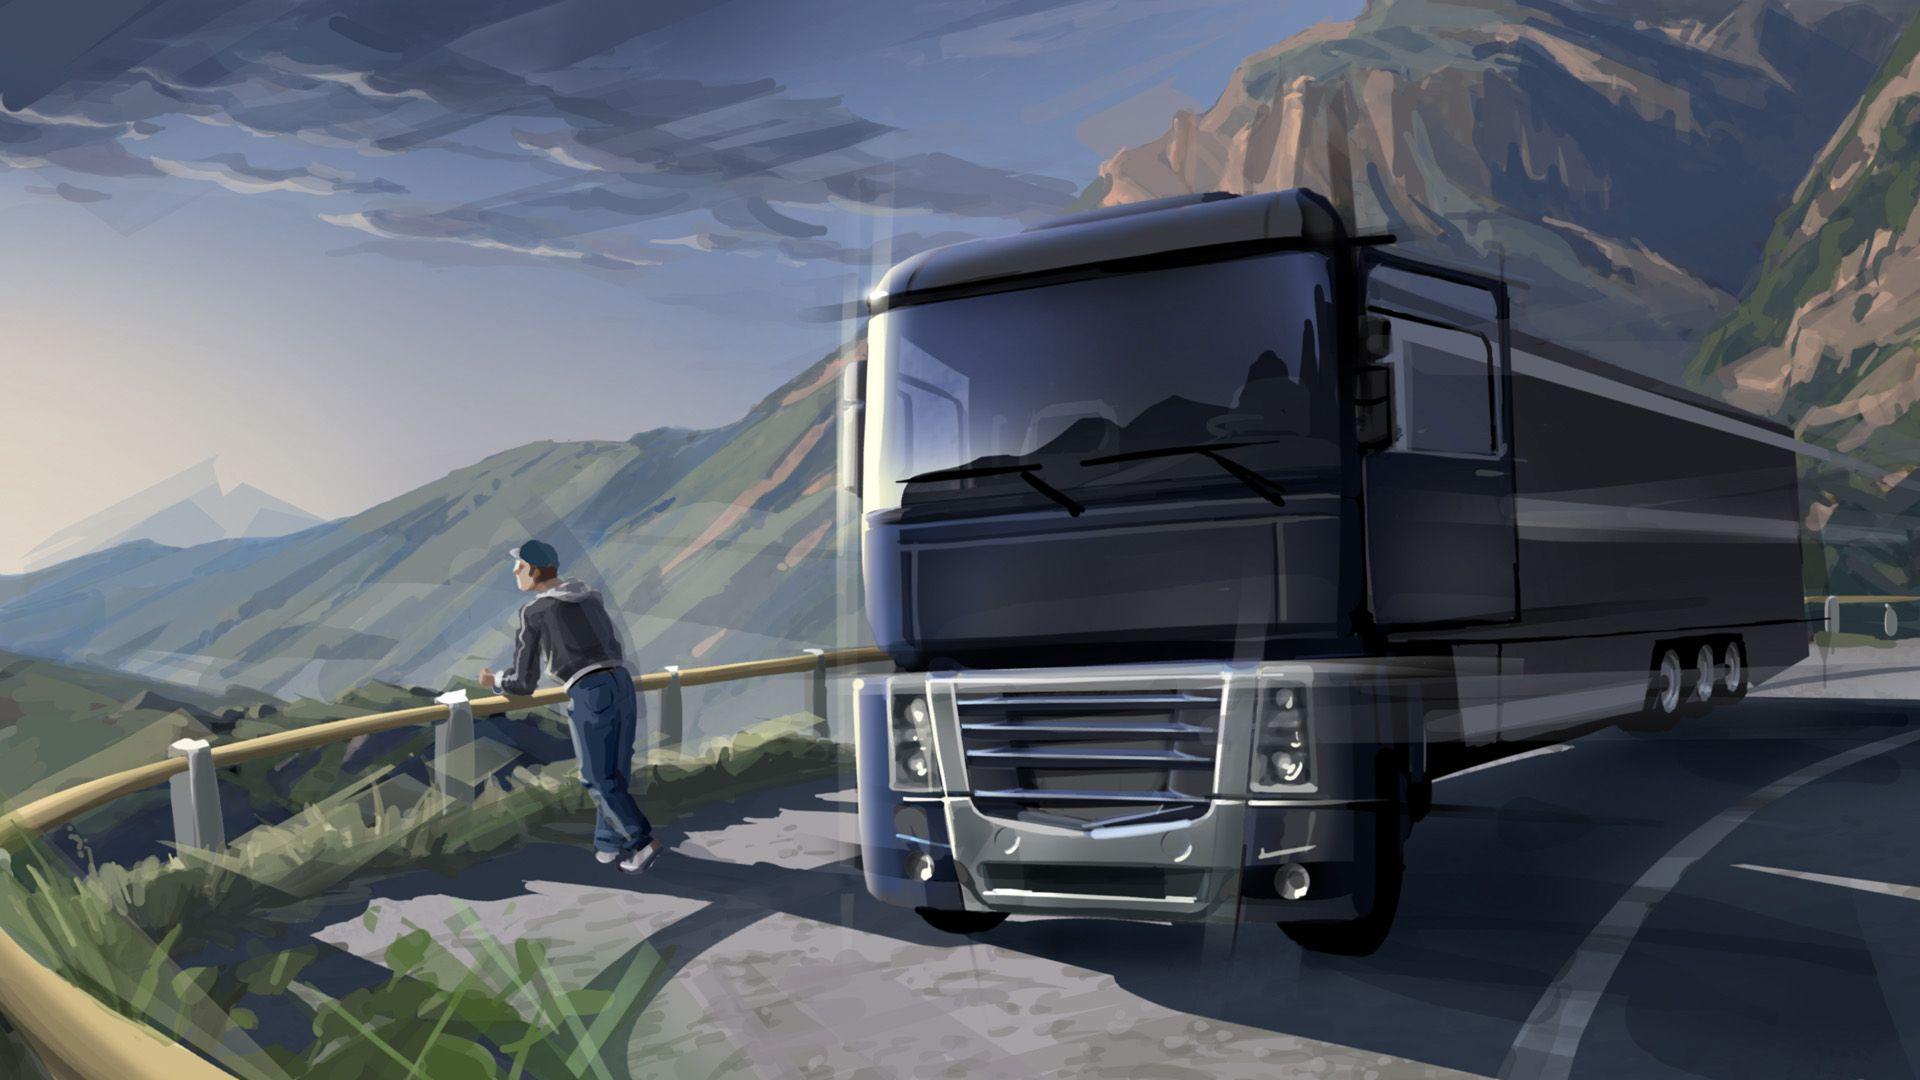 Euro Truck Simulator 2 Full HD Wallpapers and Backgrounds Image